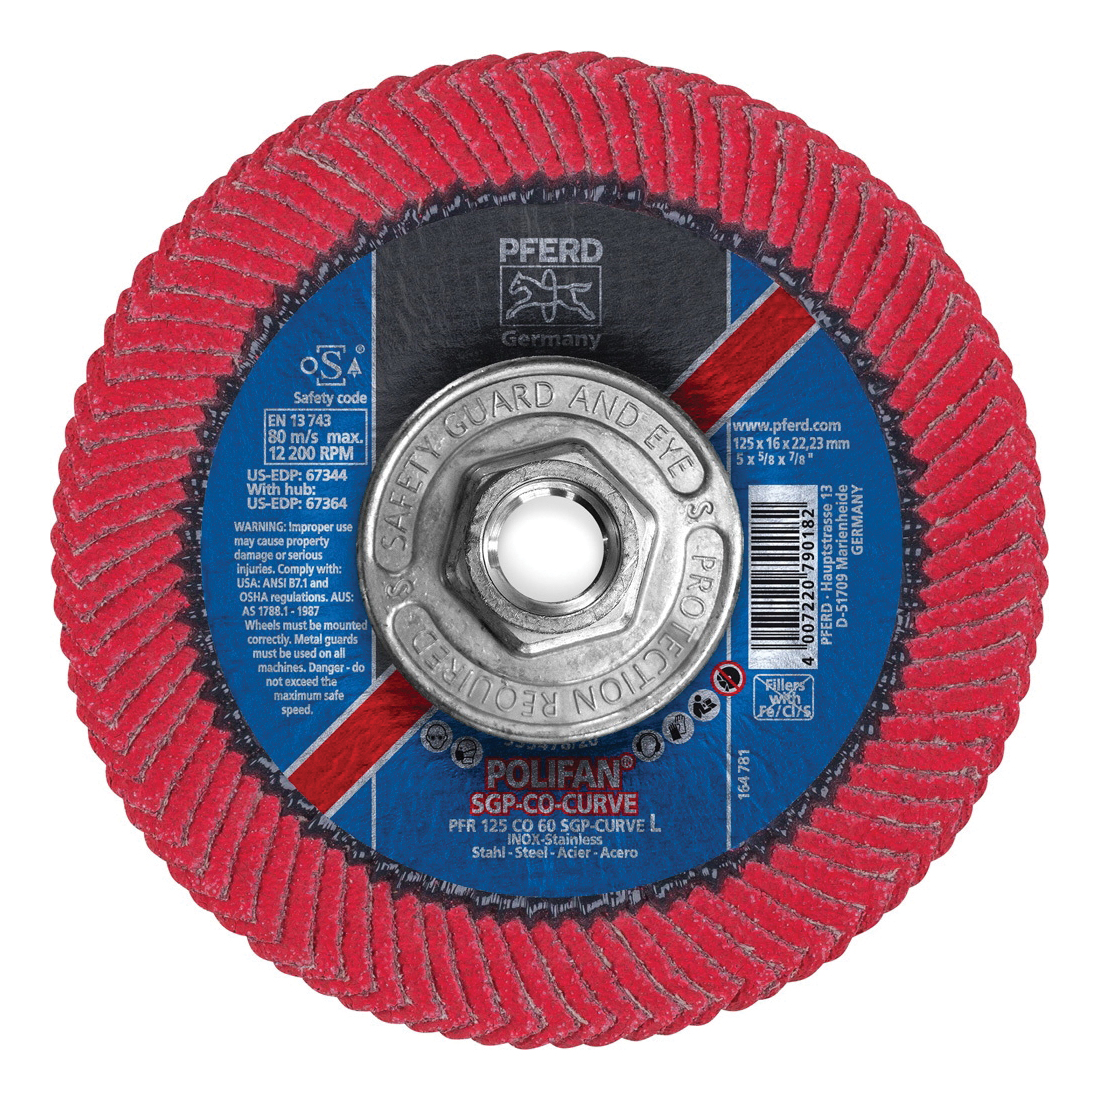 PFERD Polifan® 67364 Special Line SGP CO-CURVE Threaded Coated Abrasive Flap Disc, 5 in Dia, 60 Grit, Ceramic Oxide Abrasive, Type PFR/Radial Disc